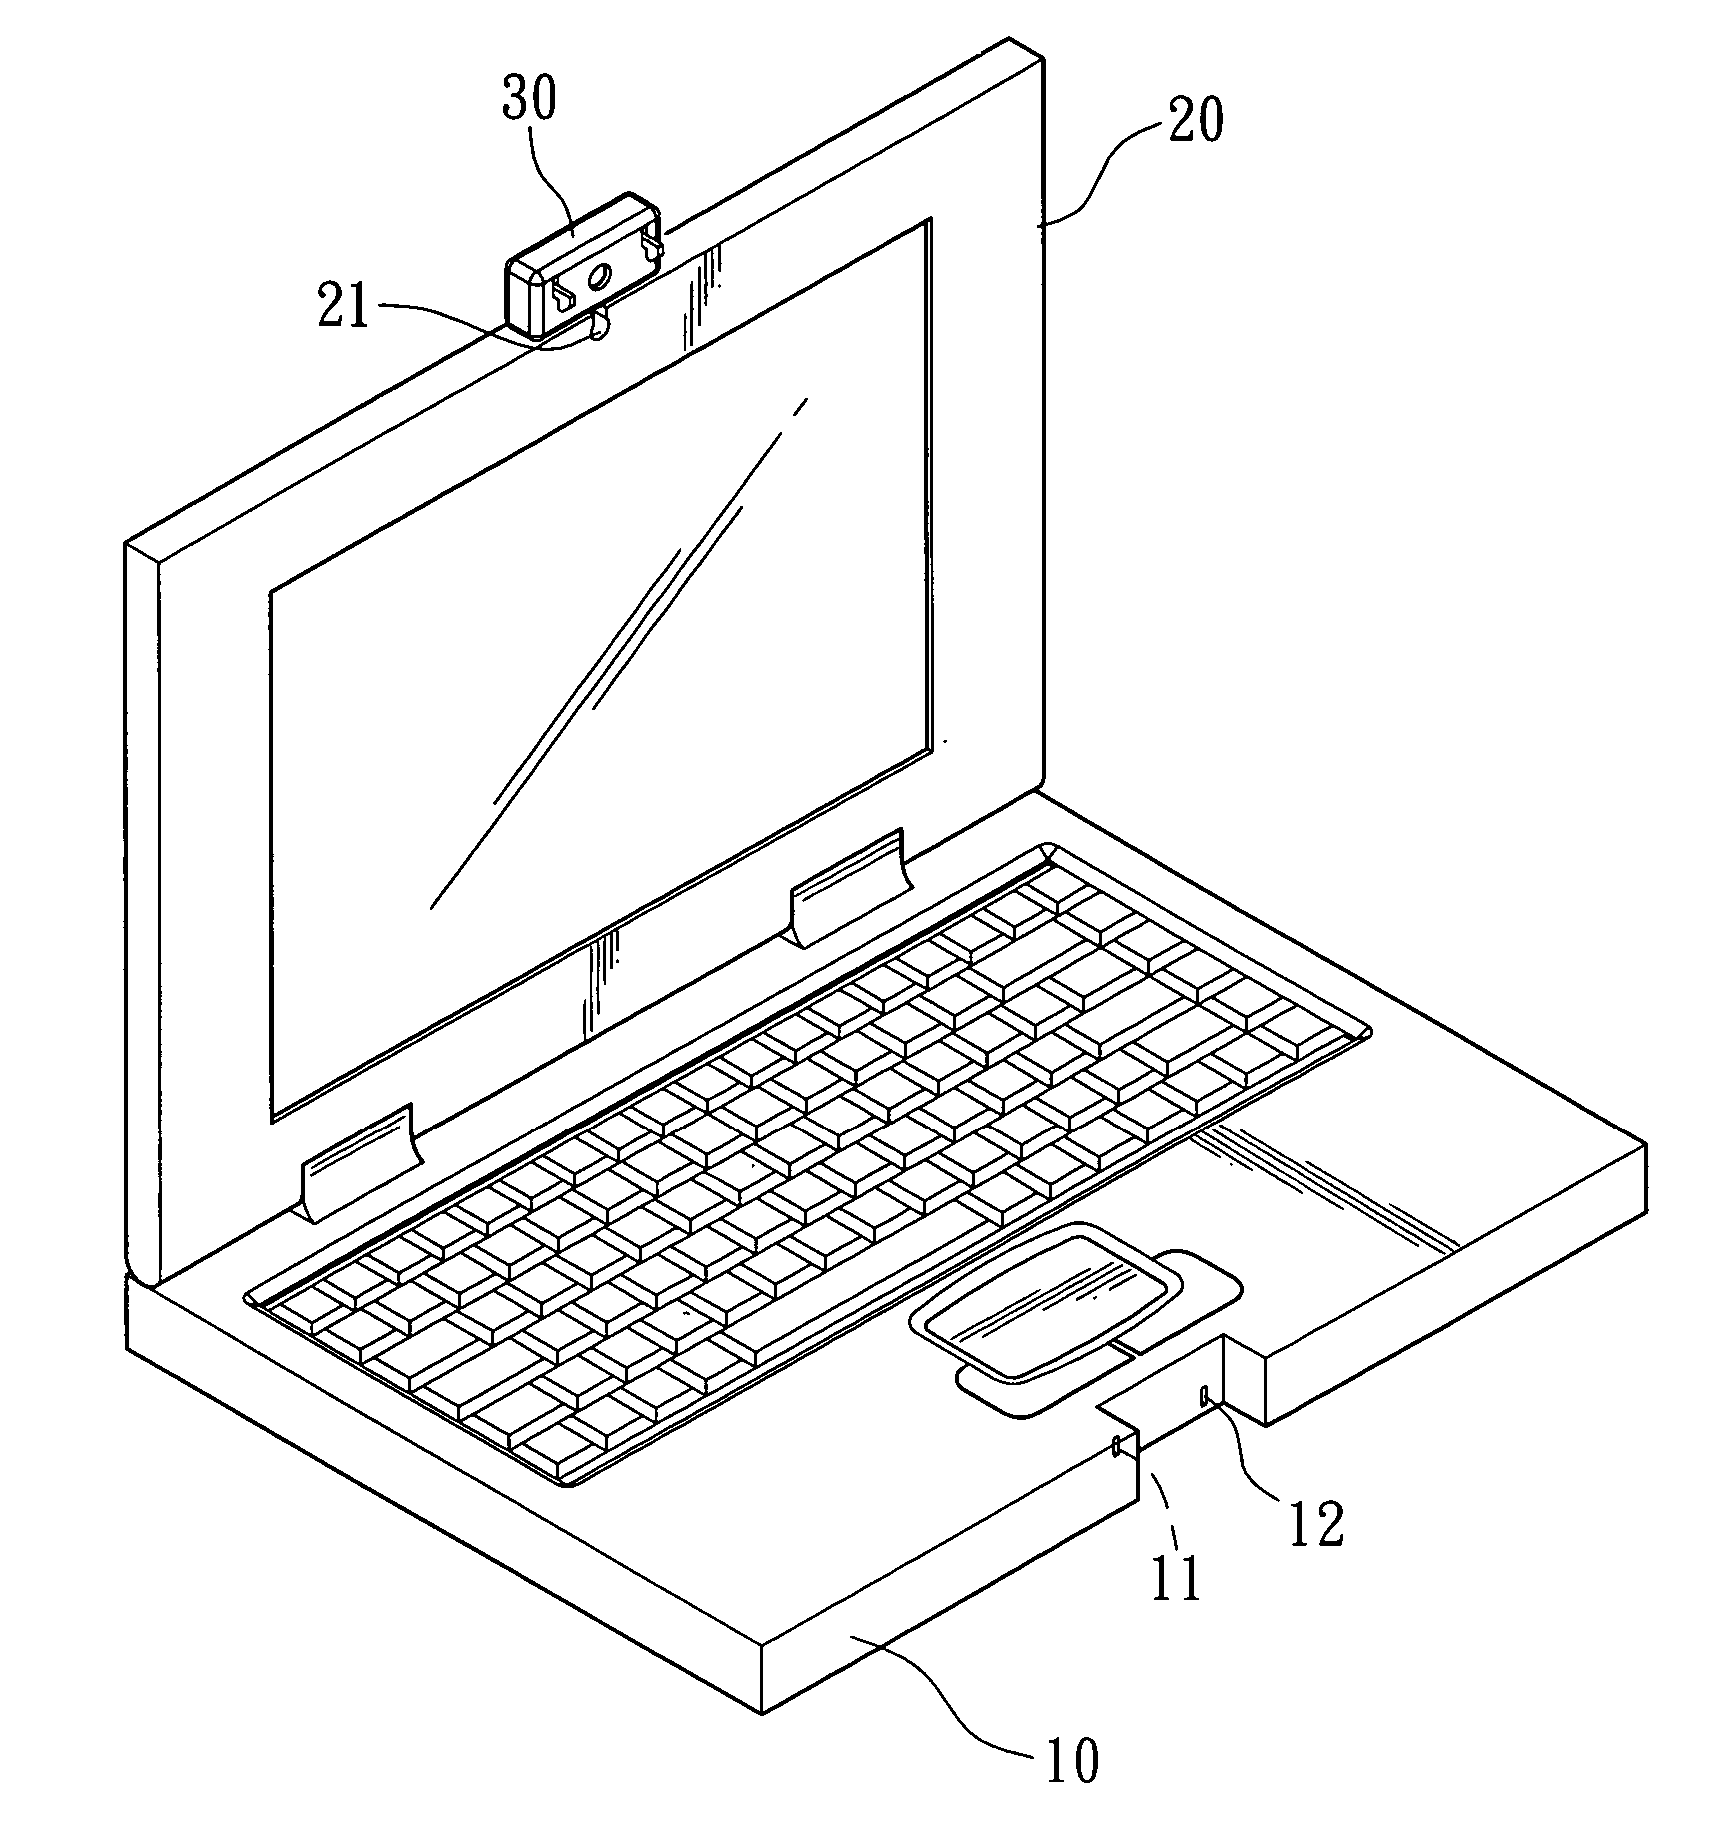 Multimedia device for portable computers